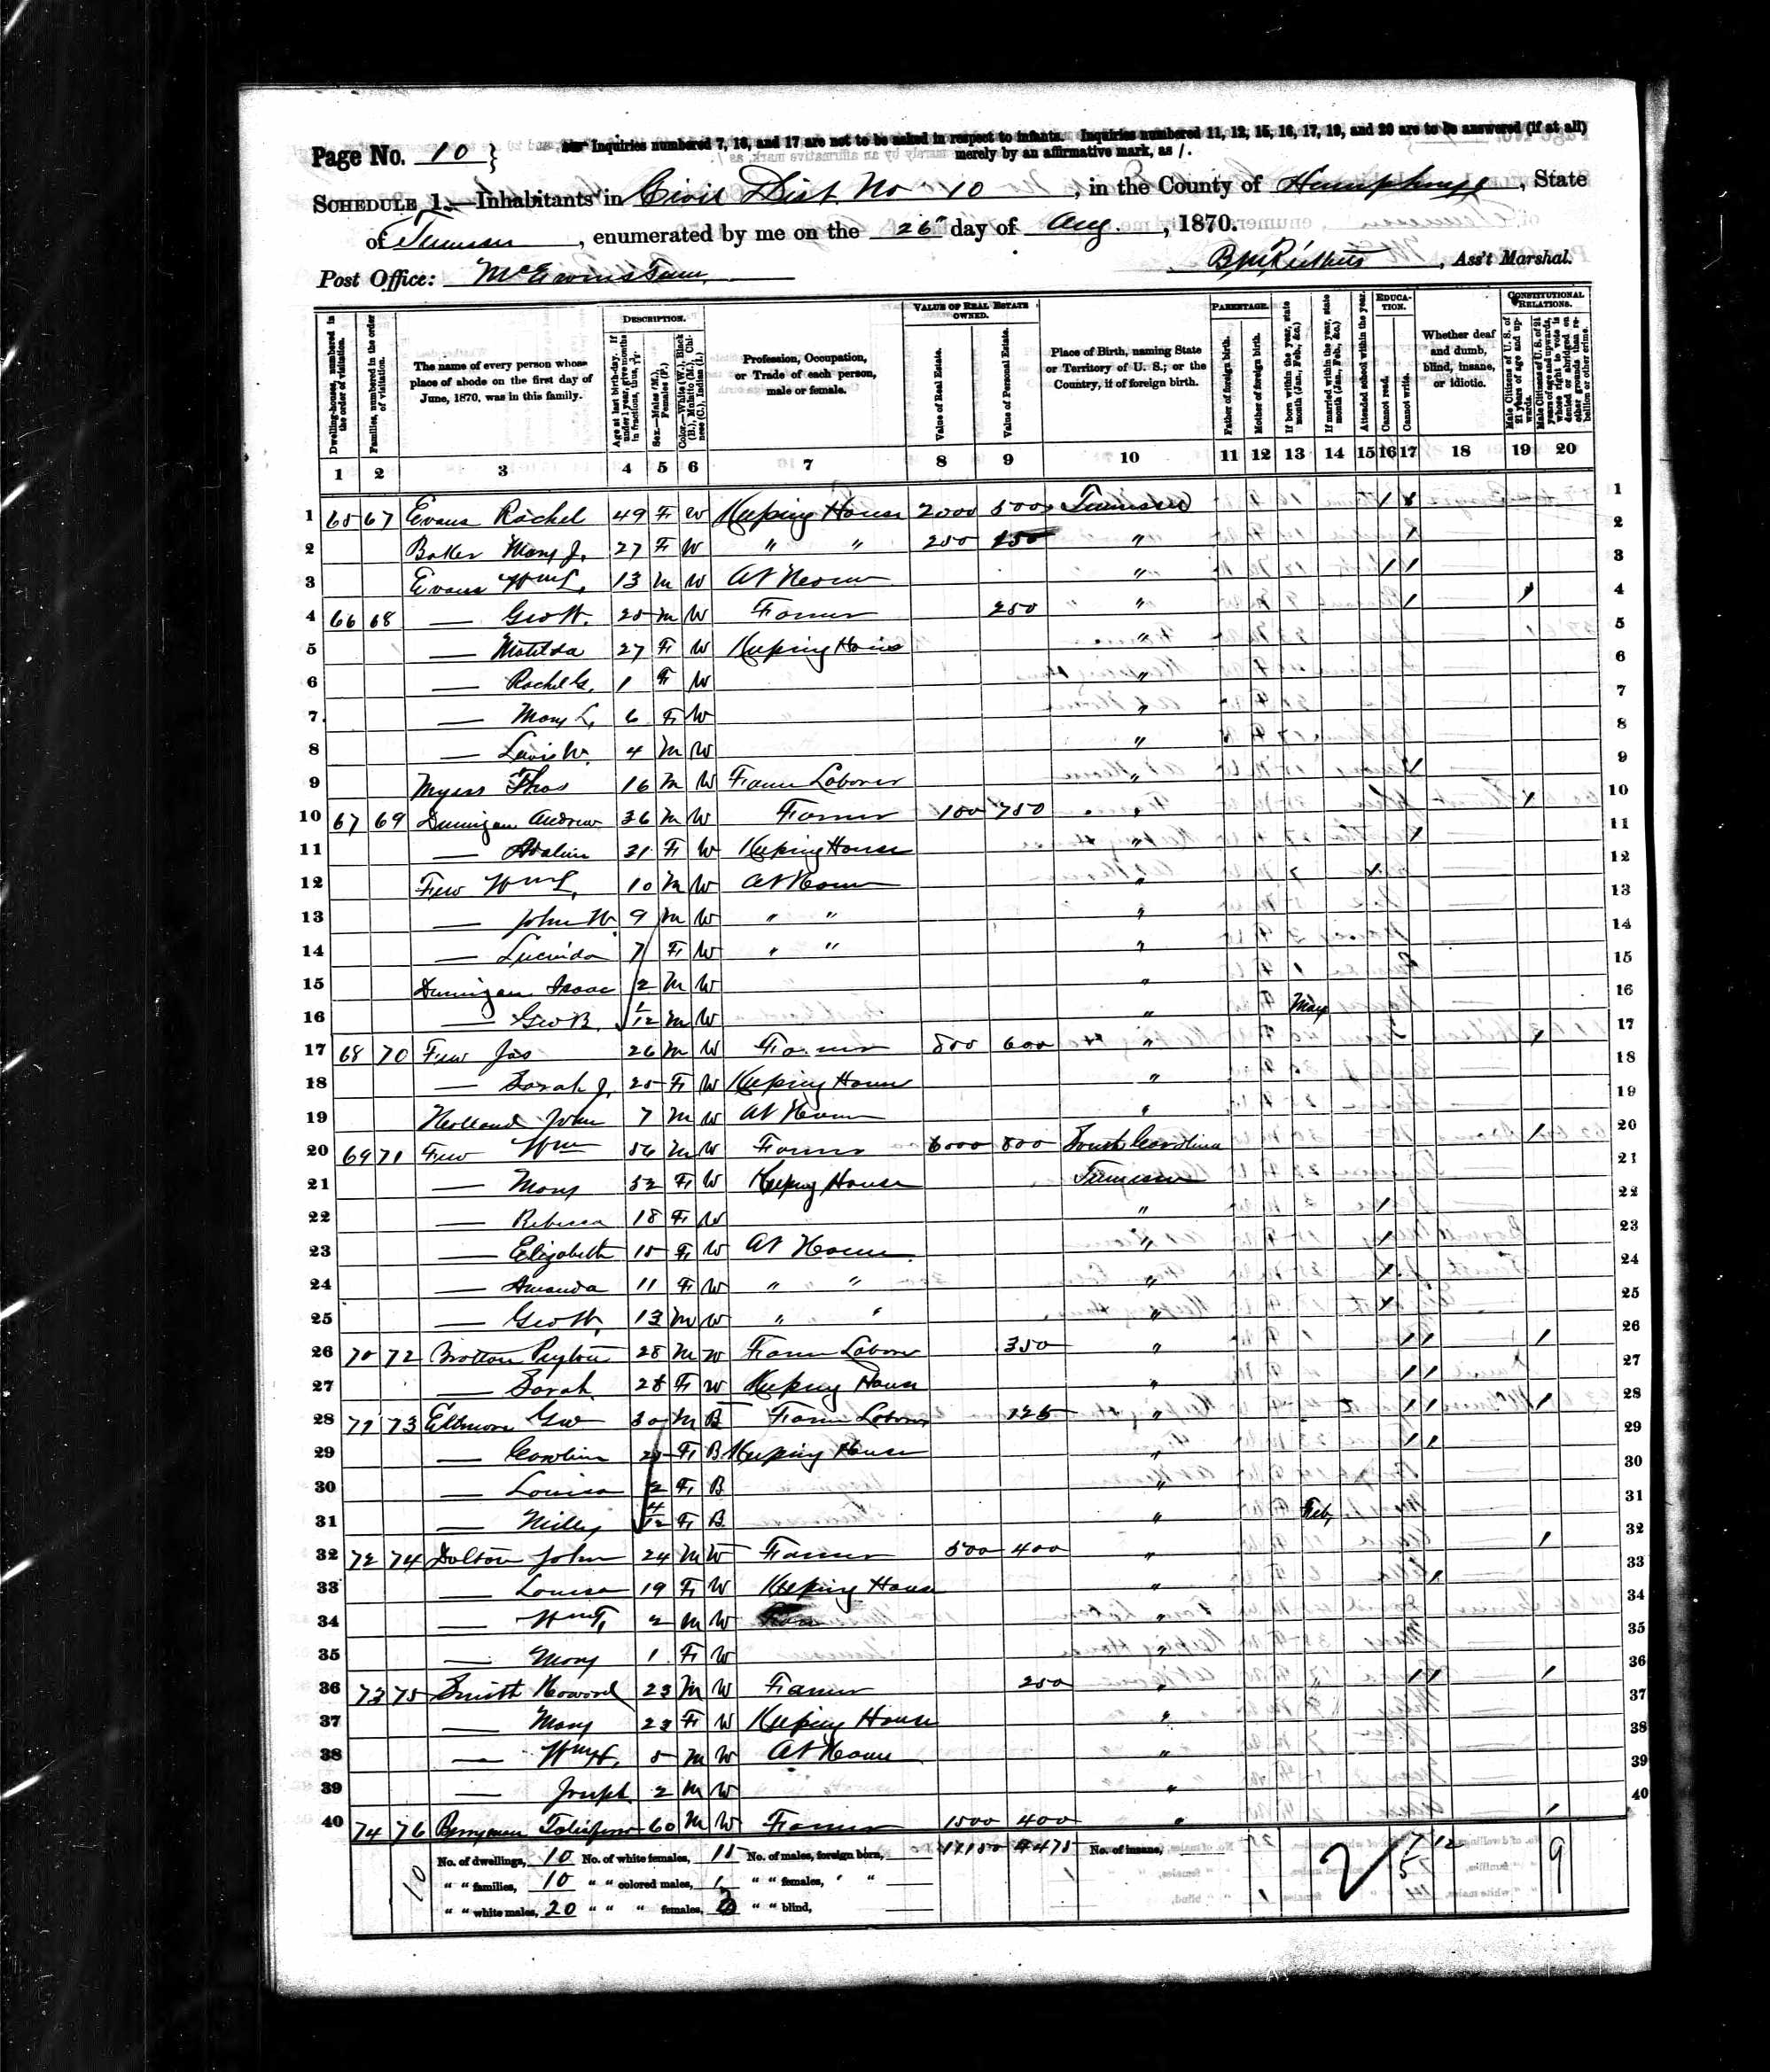 Rachael (Brazzell) Evans, 1870 Humphreys County, Tennessee, census